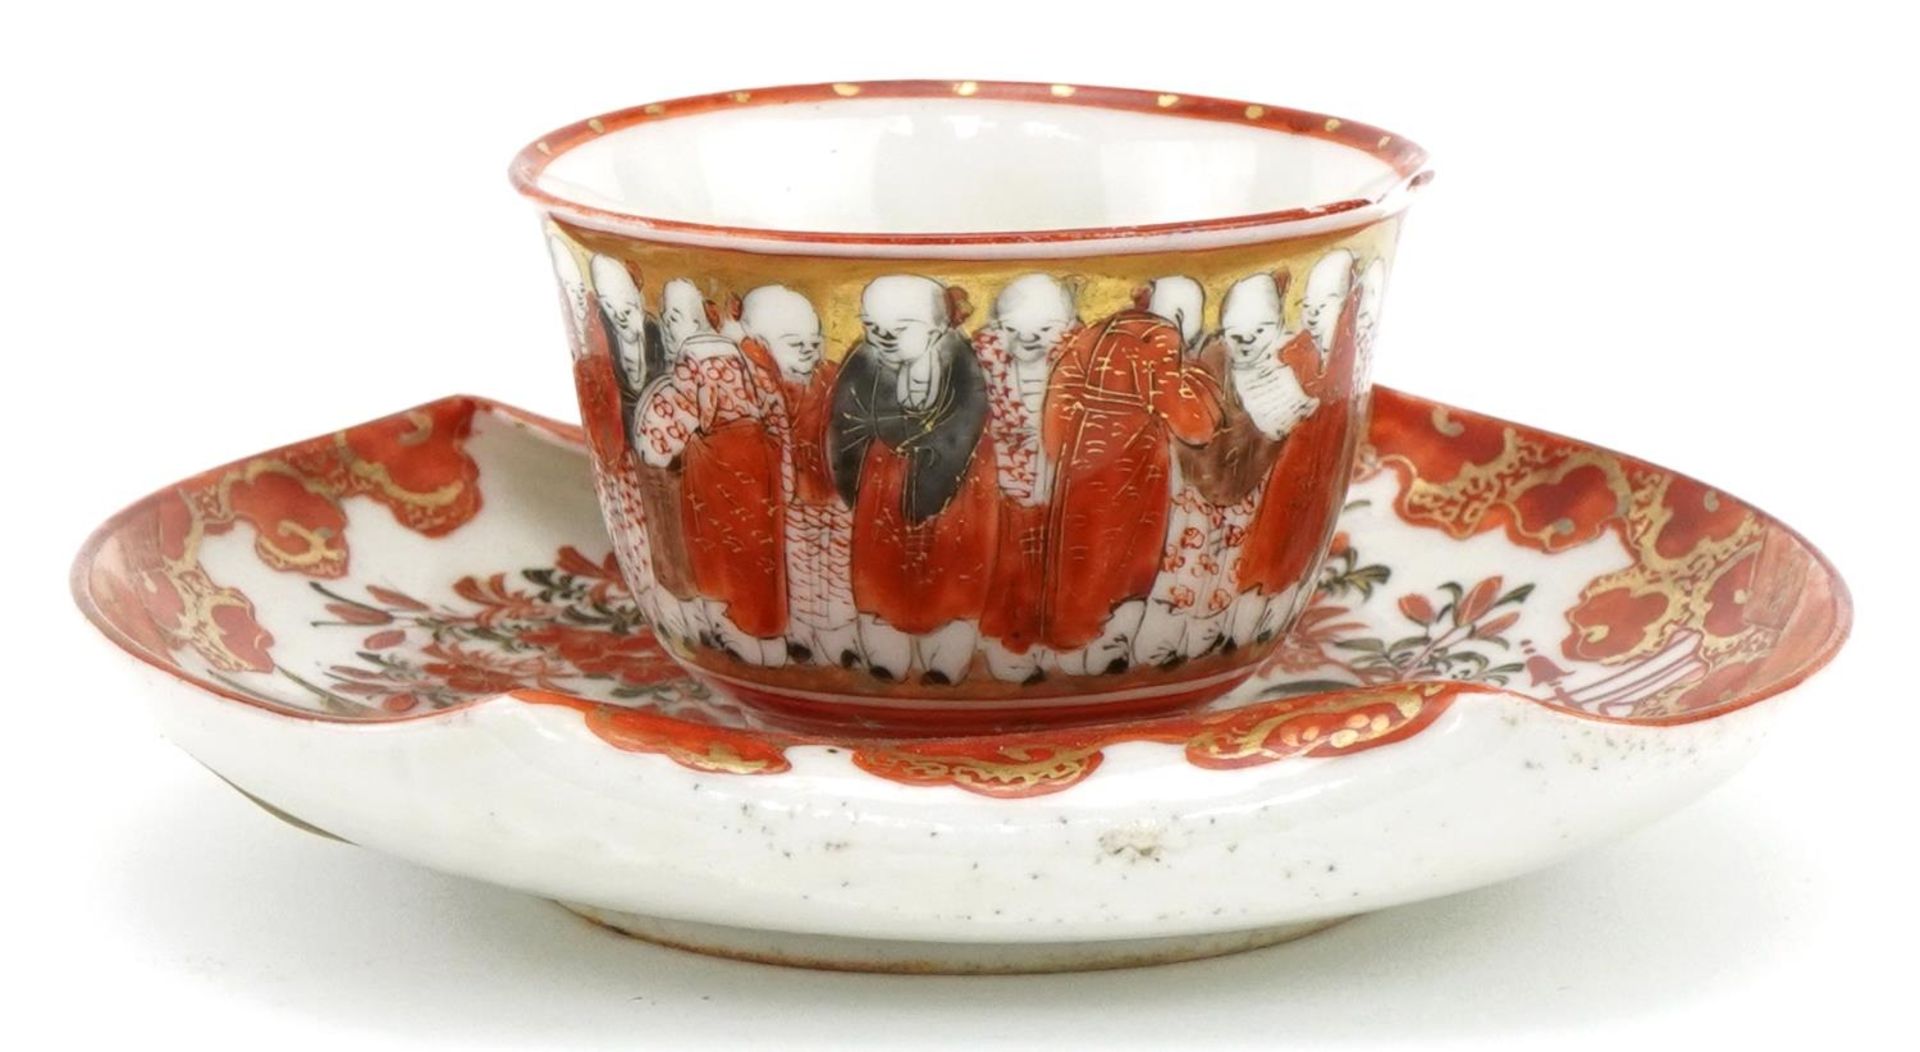 Japanese Kutani porcelain tea bowl with saucer hand painted with figures and flowers, the largest